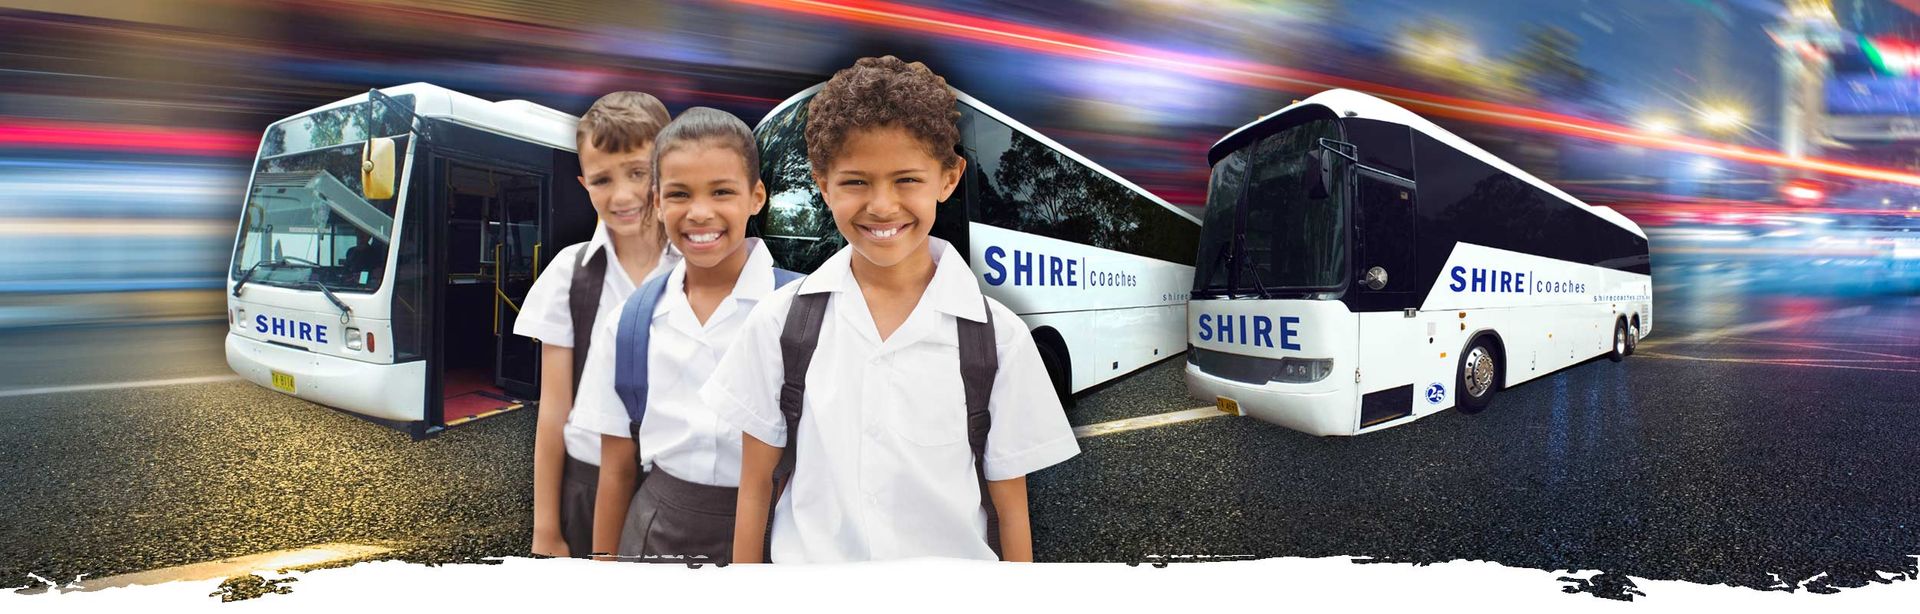 school bus charter services image